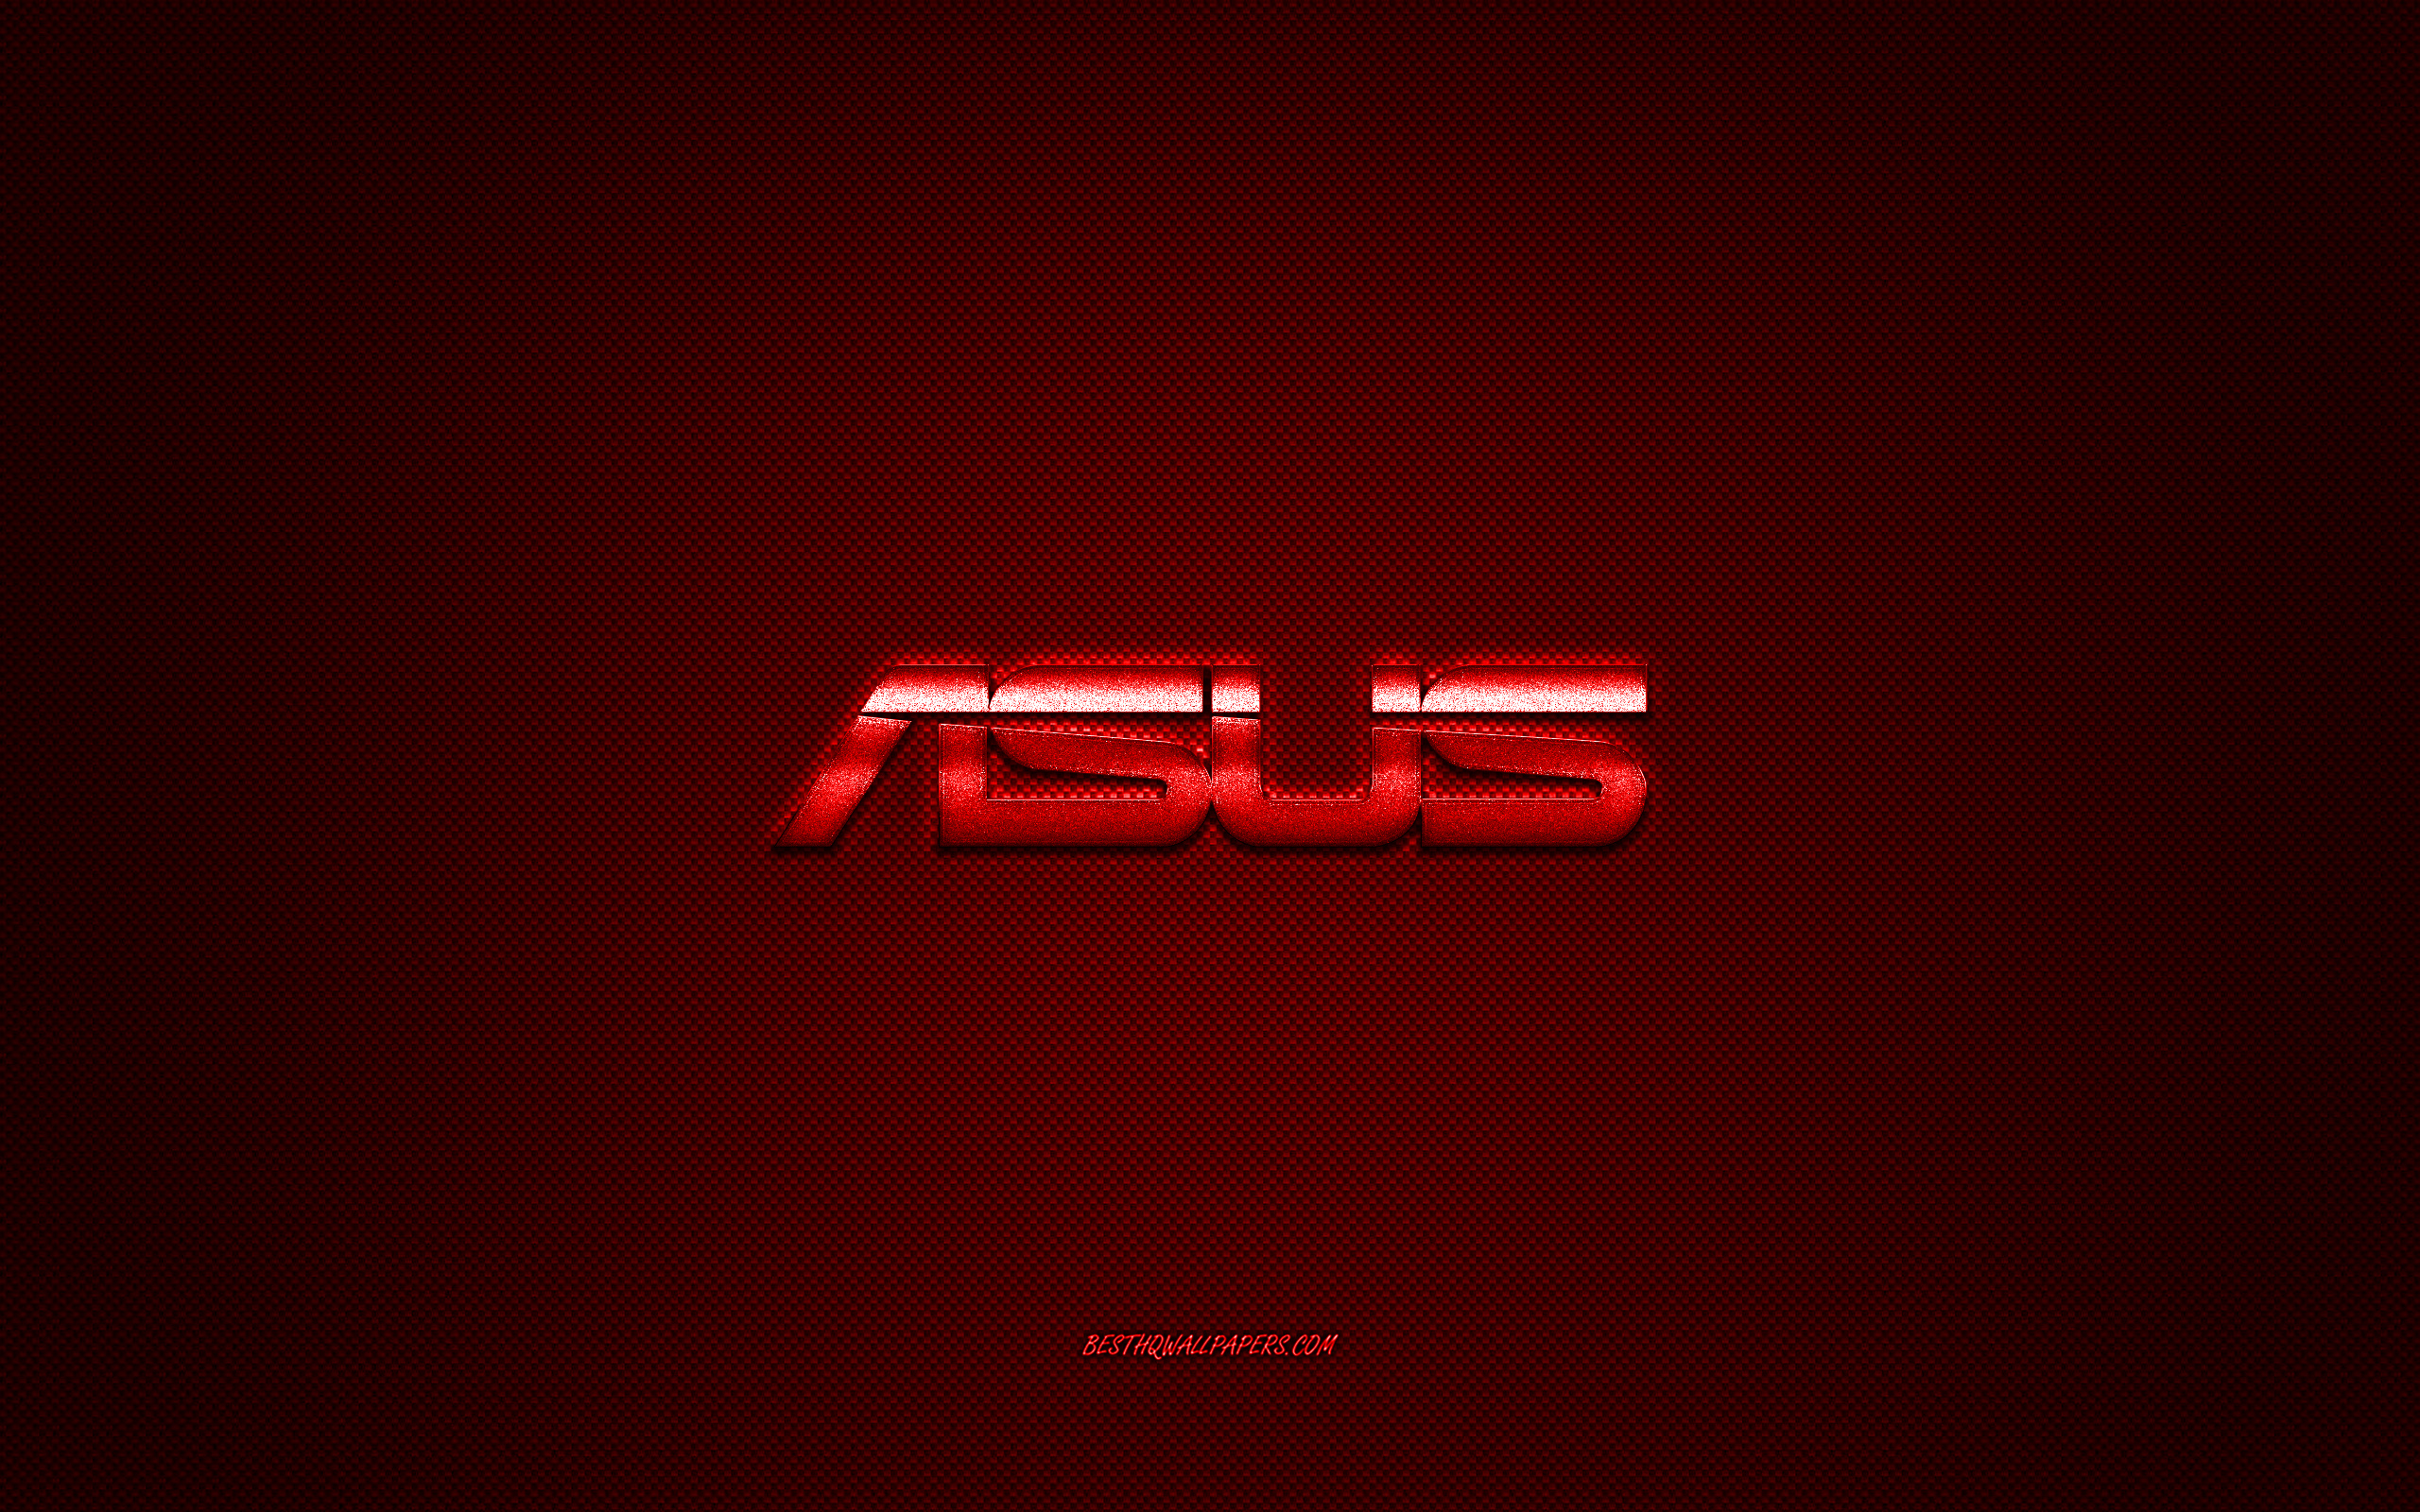 Download wallpaper Asus logo, red shiny logo, Asus metal emblem, wallpaper for Asus smartphones, red carbon fiber texture, Asus, brands, creative art for desktop with resolution 2560x1600. High Quality HD picture wallpaper